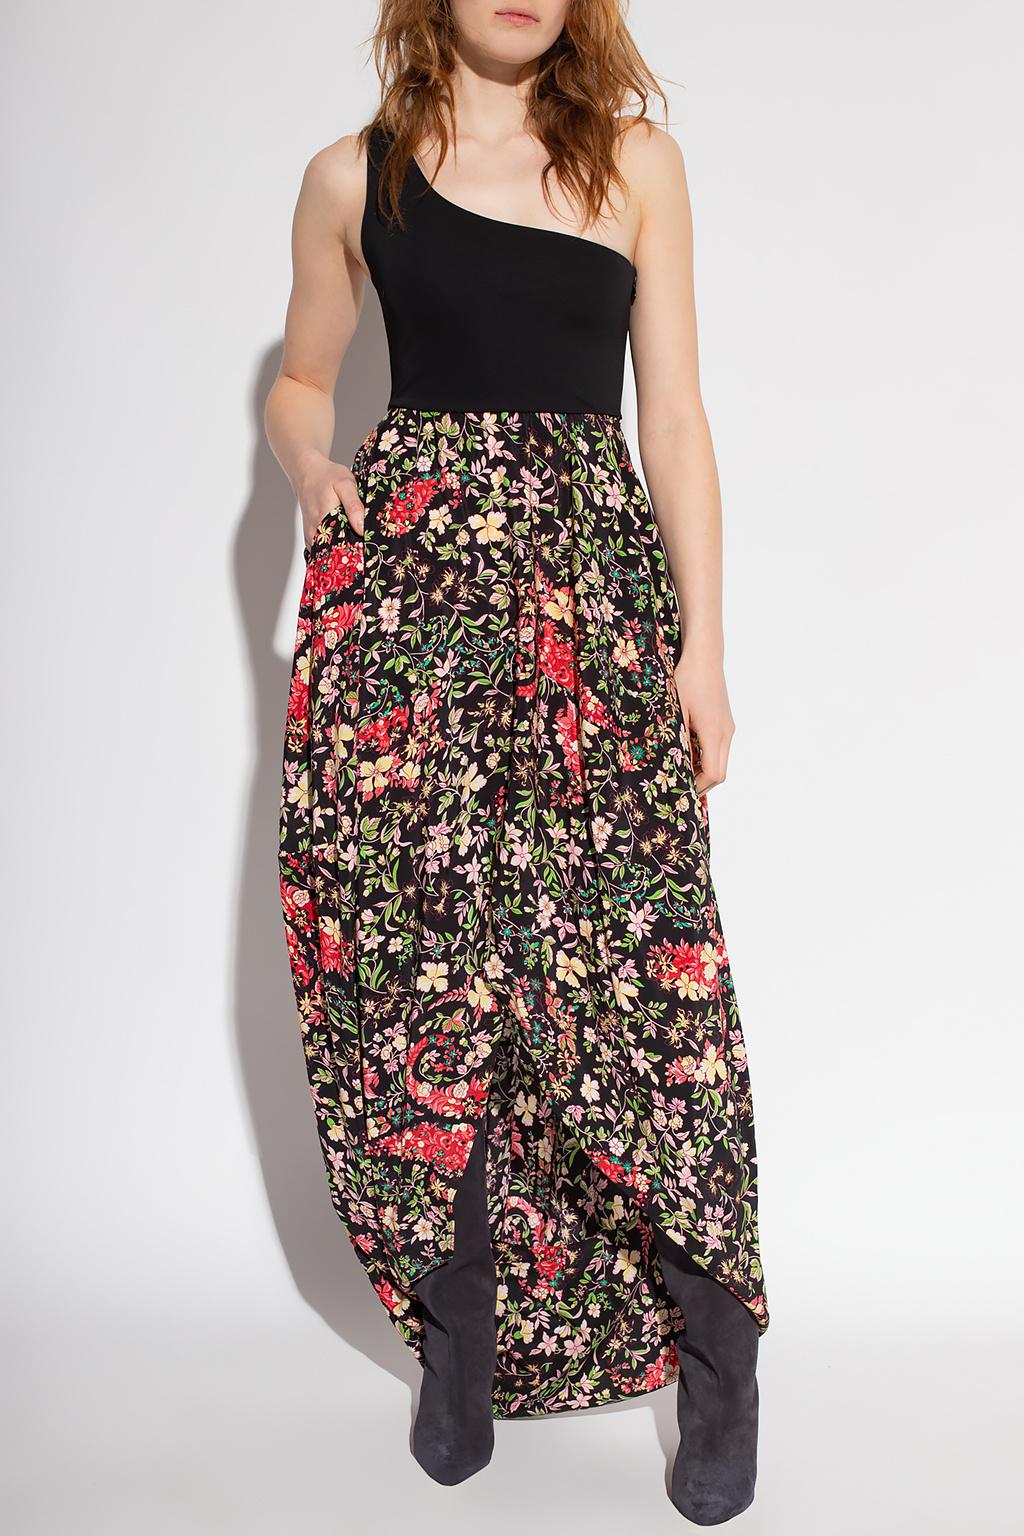 One-shoulder dress from Etro. With a black fitted top bodice, this style features a hidden zip and a hook & eye closure on the side and a maxi silk skirt with a frontal split and a colorful floral print.
Brand new, never worn with tags.
Made in